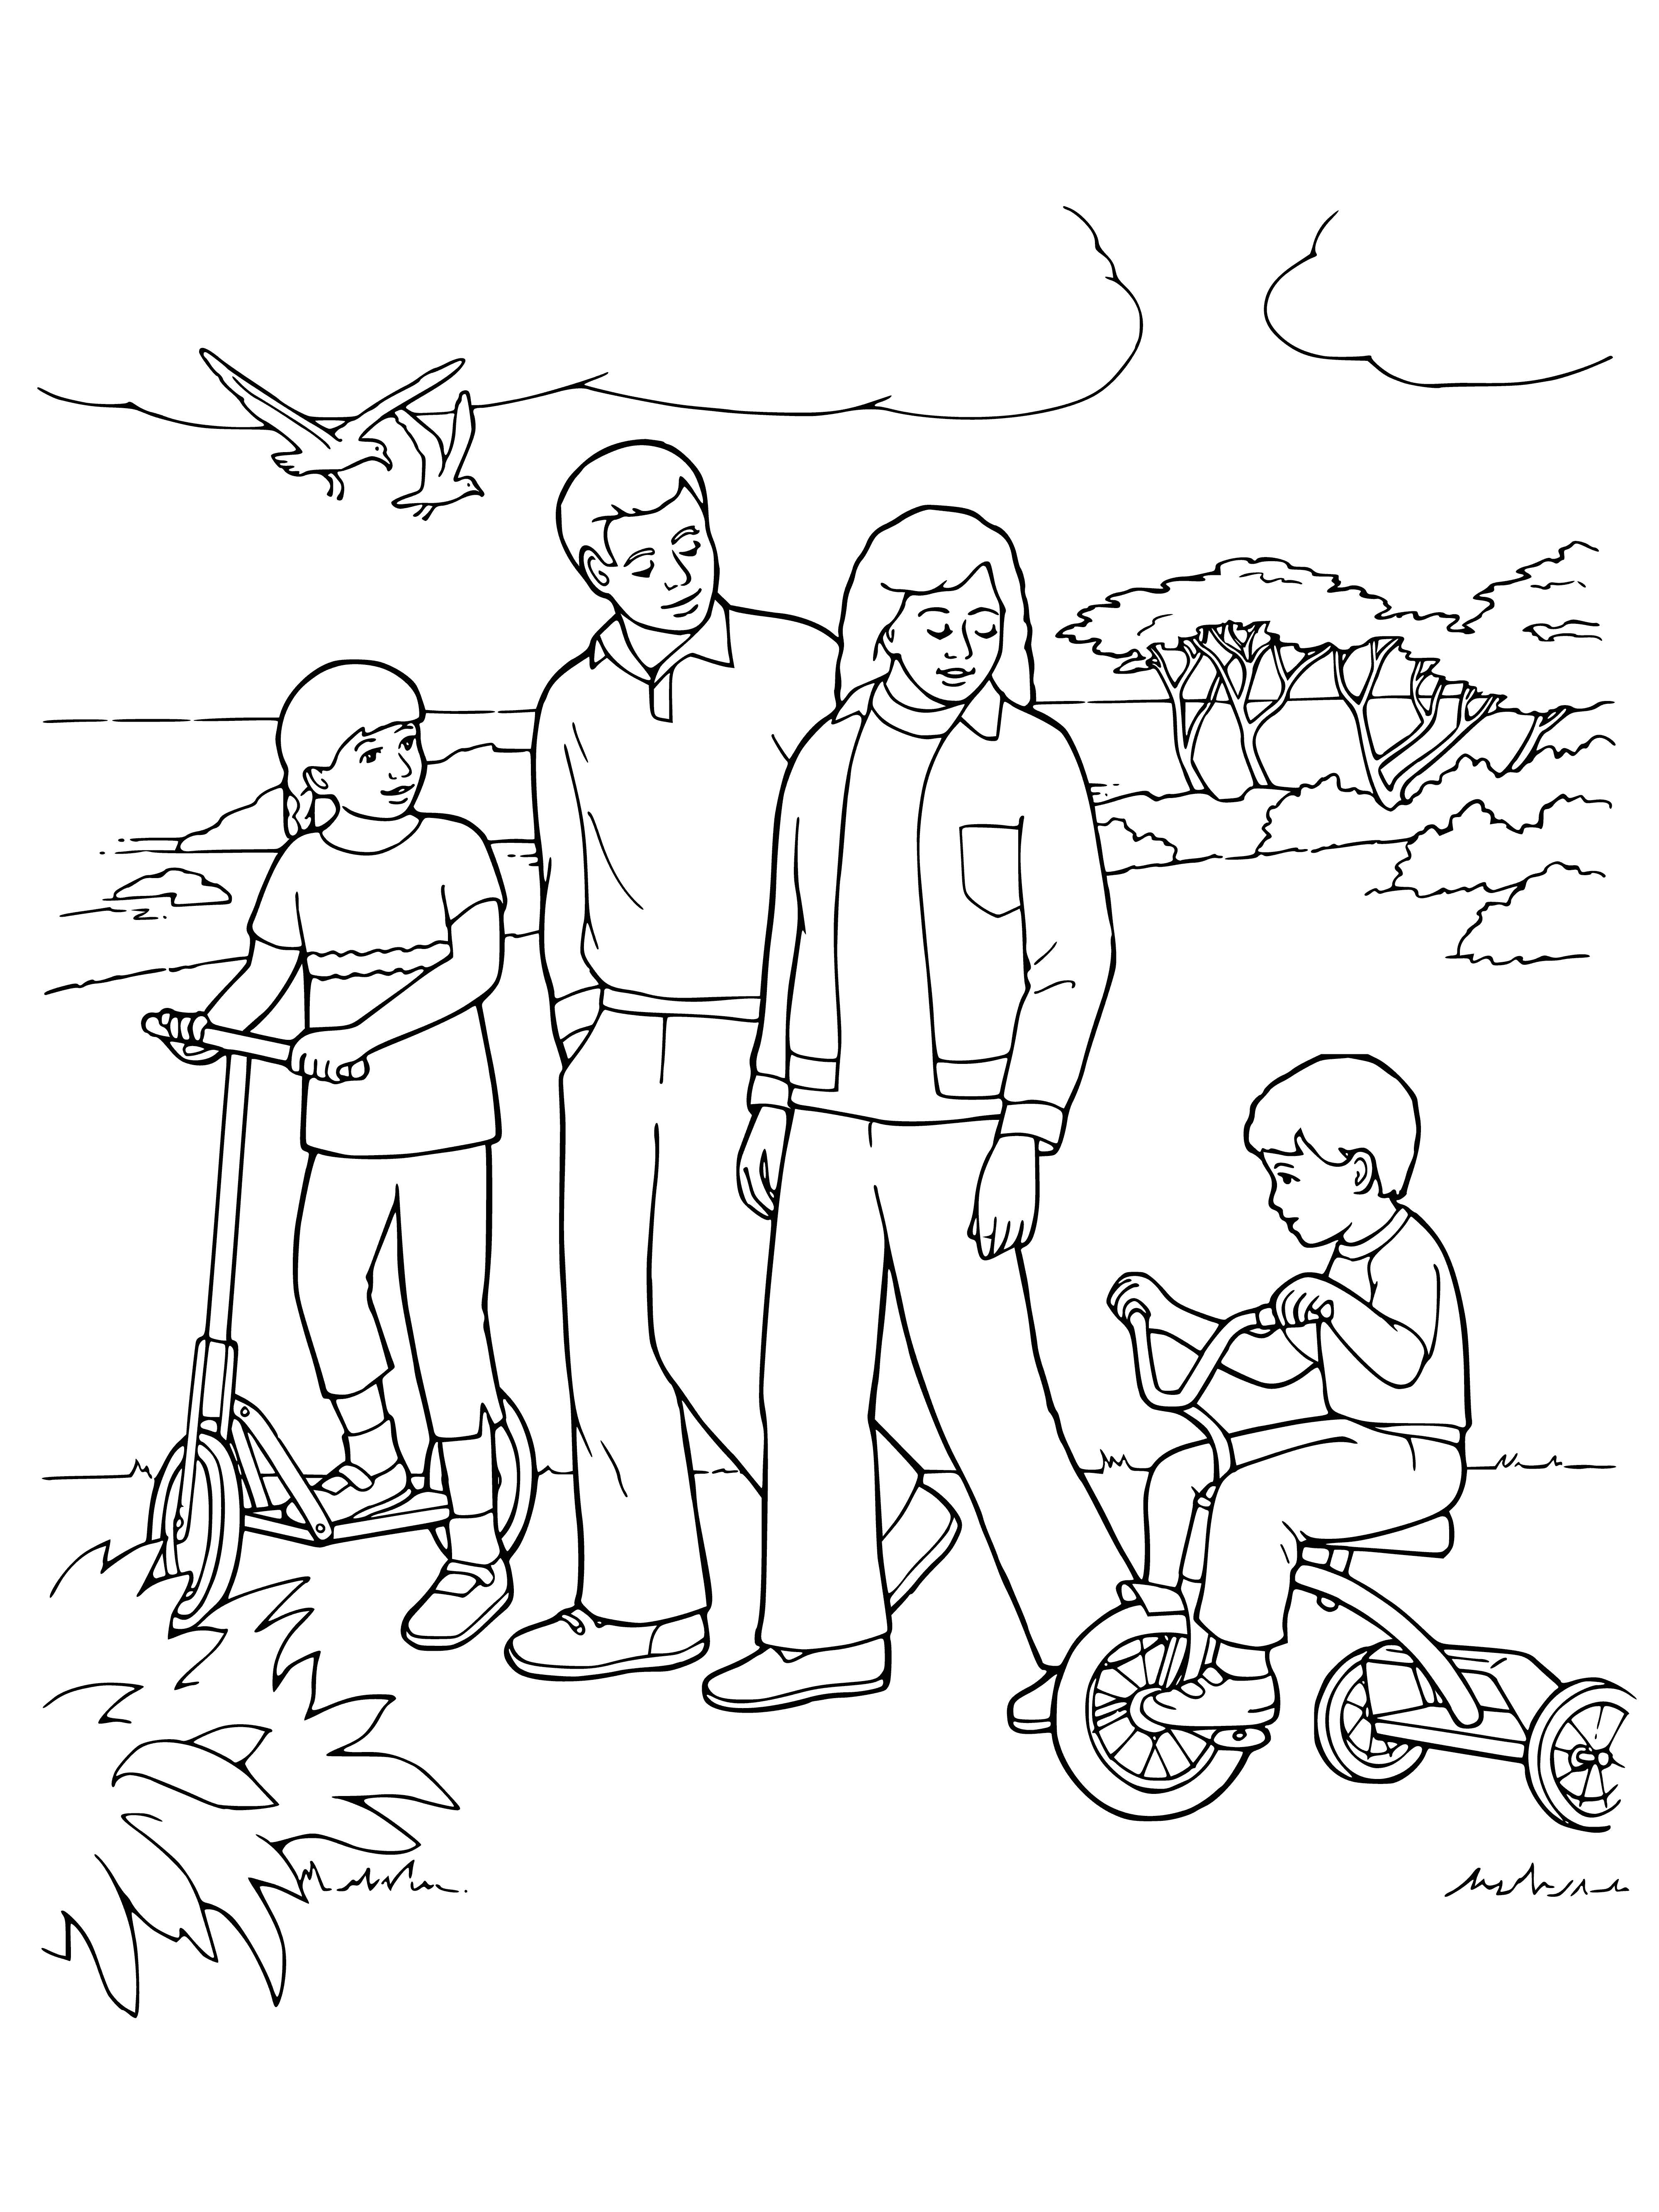 coloring page: People of all ages walking in park, smiling & enjoying each other's company. Parks have trees, pond & playground in background.